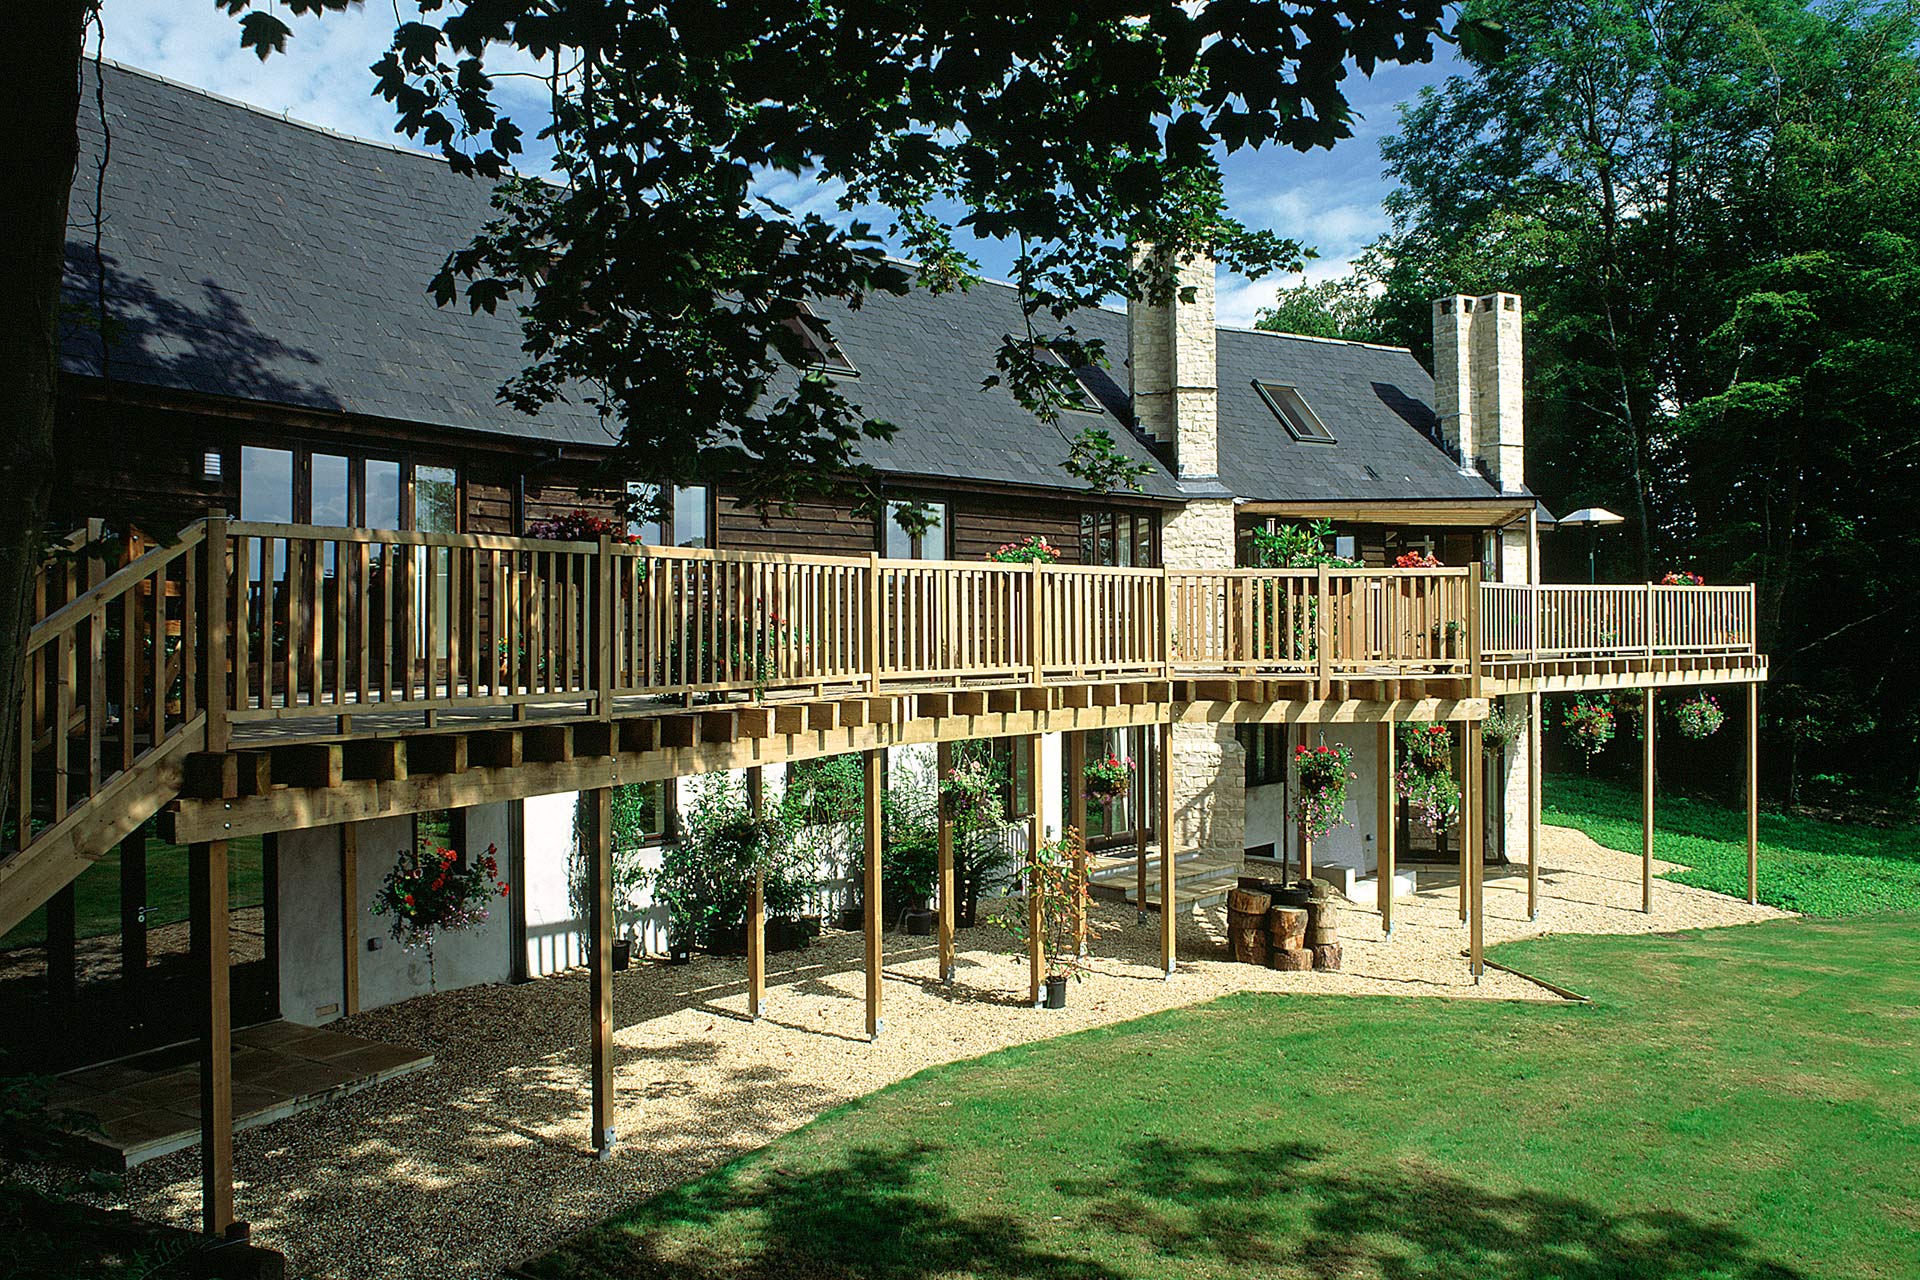 external timber decking area around first floor of house